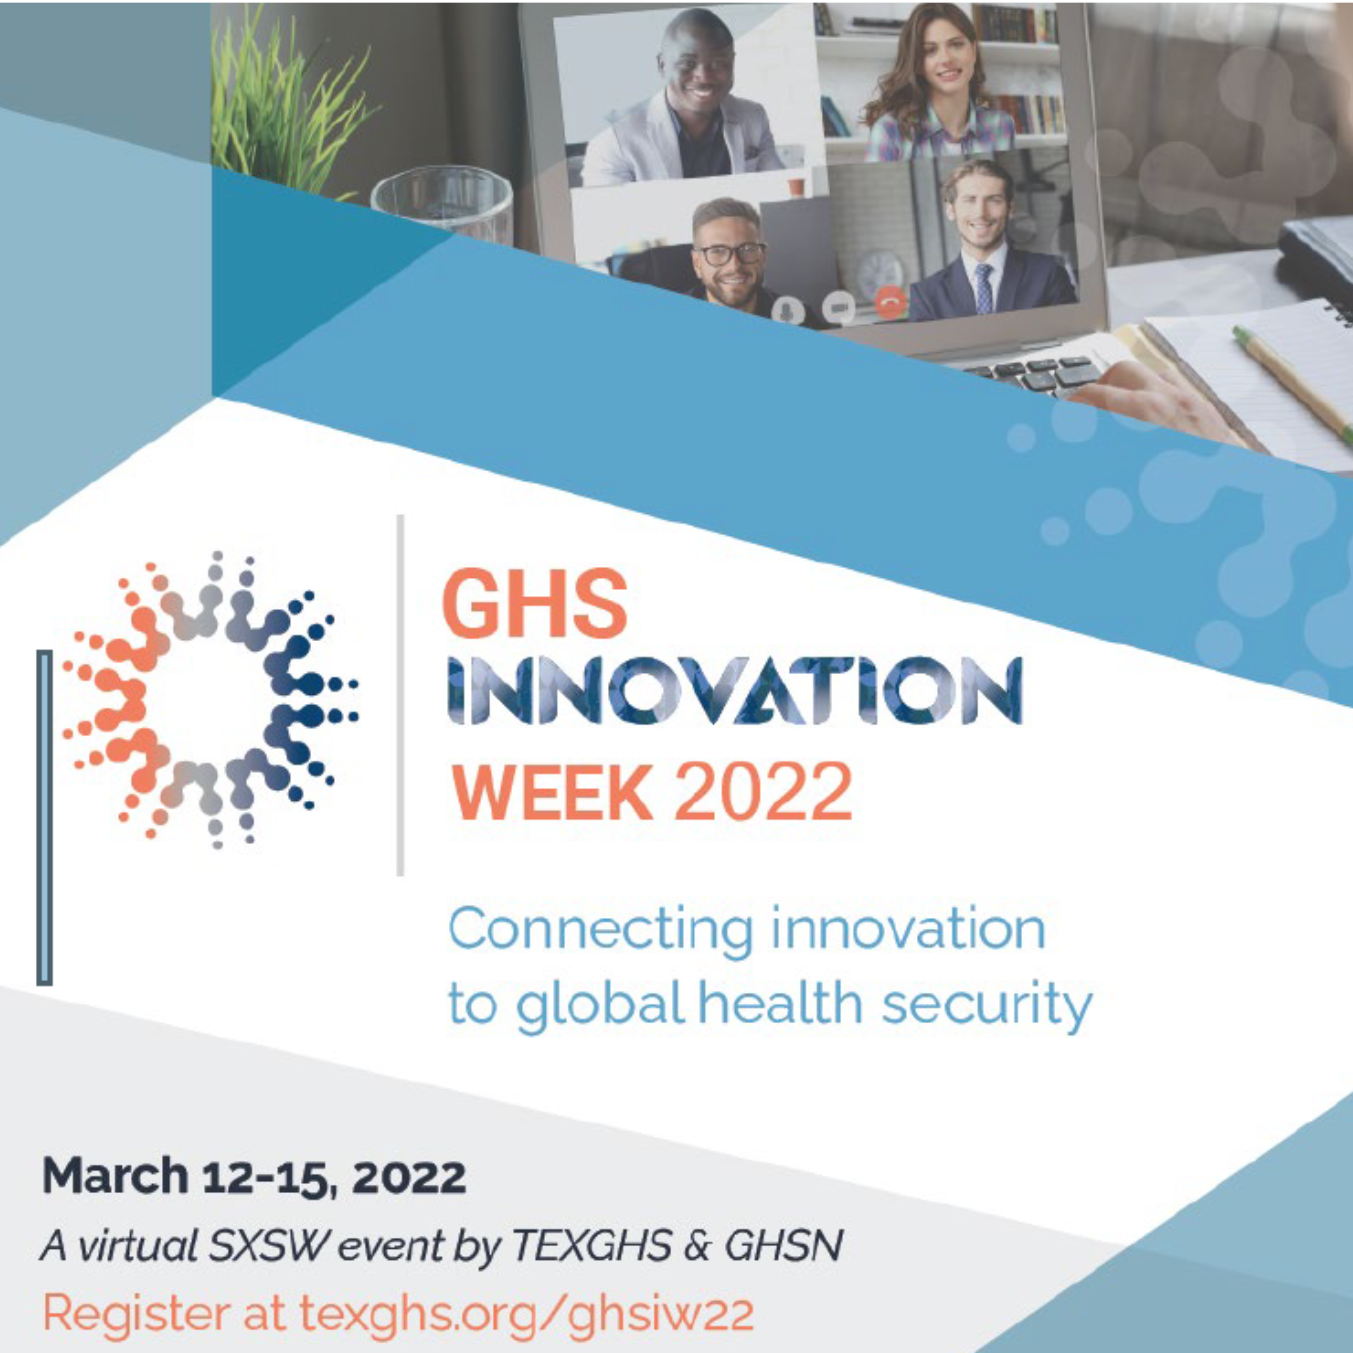 World Health Leaders and Innovators Unite for Pandemic Preparedness at Global Health Security Innovation Week 2022